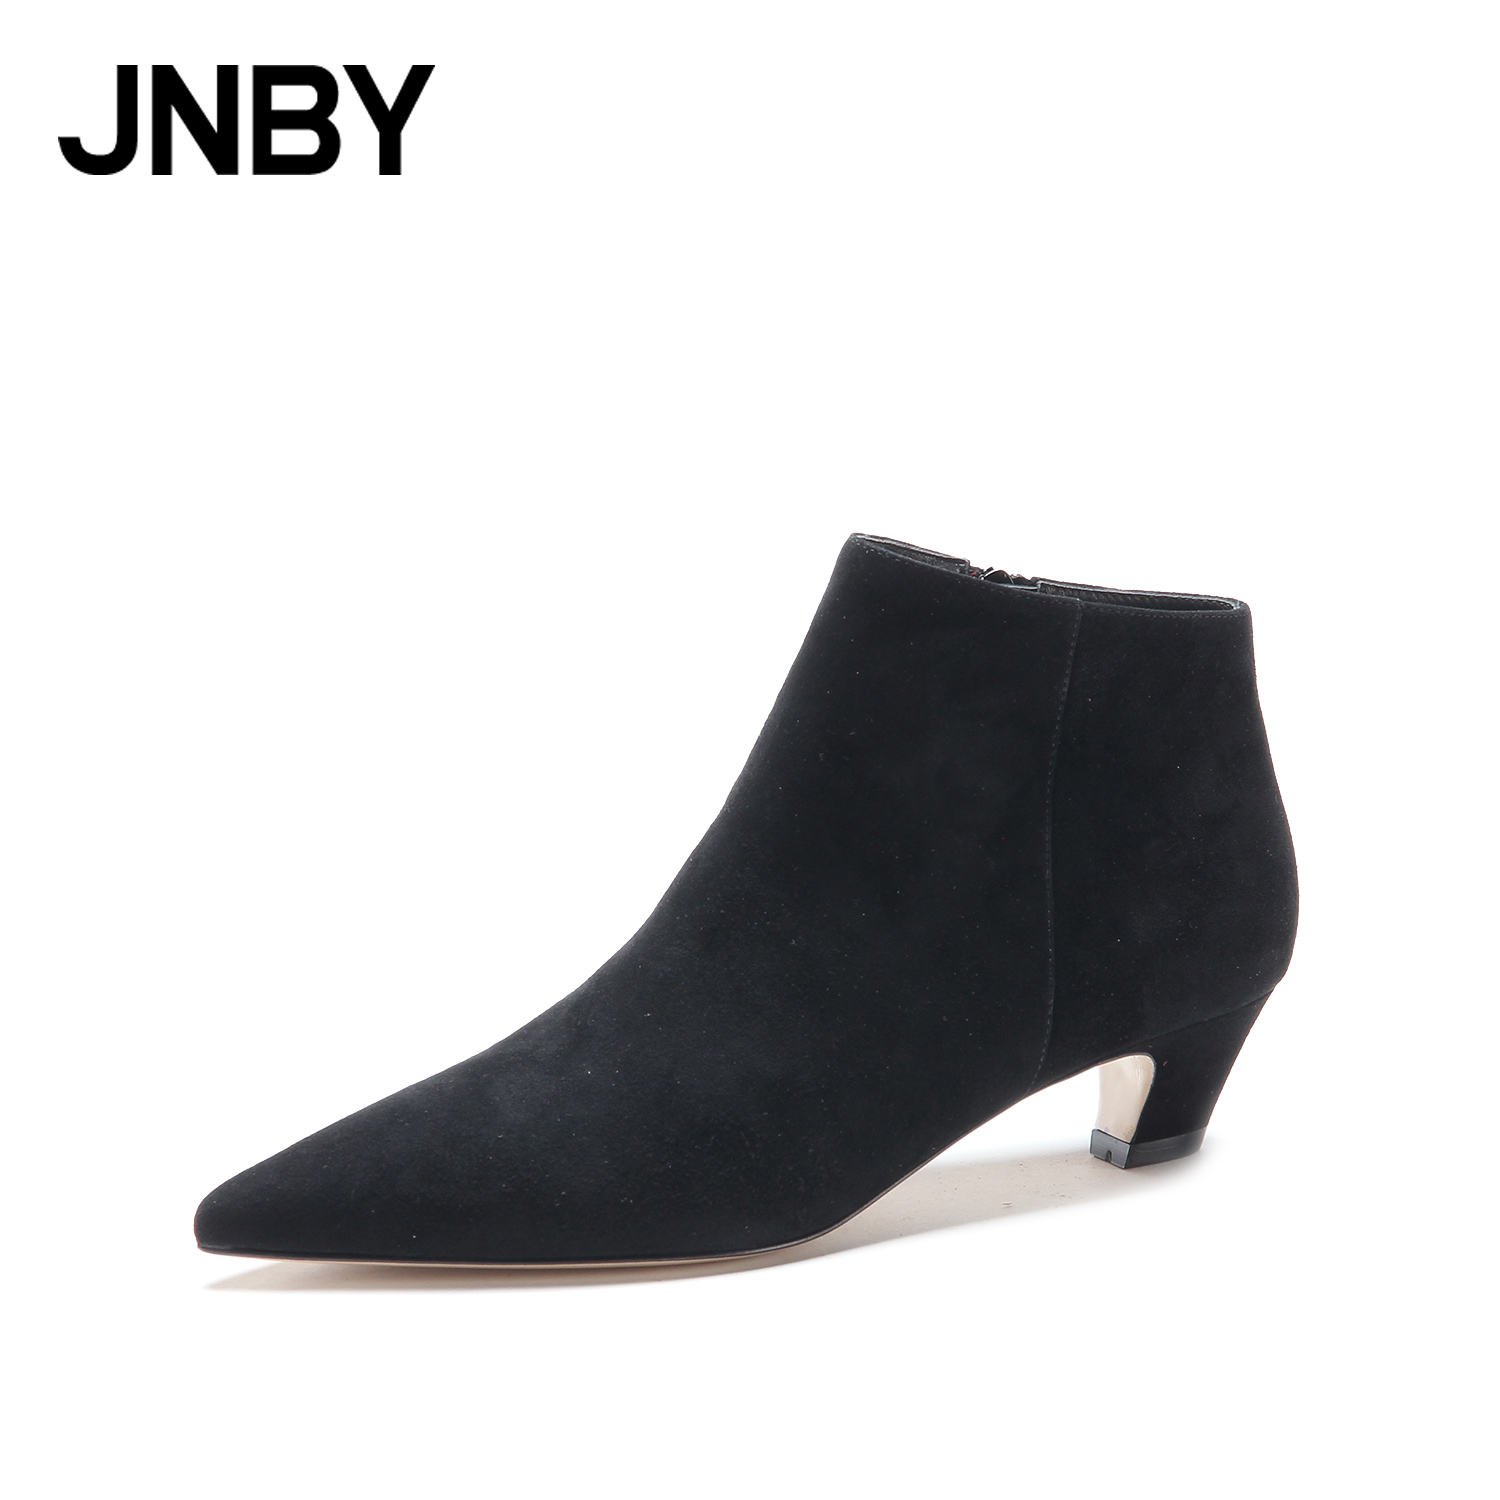 JNBY/Jiangnan Cloth Women's Shoes New Style Fashionable Leading British Style Slender High-heeled Boots Children 7H0570300